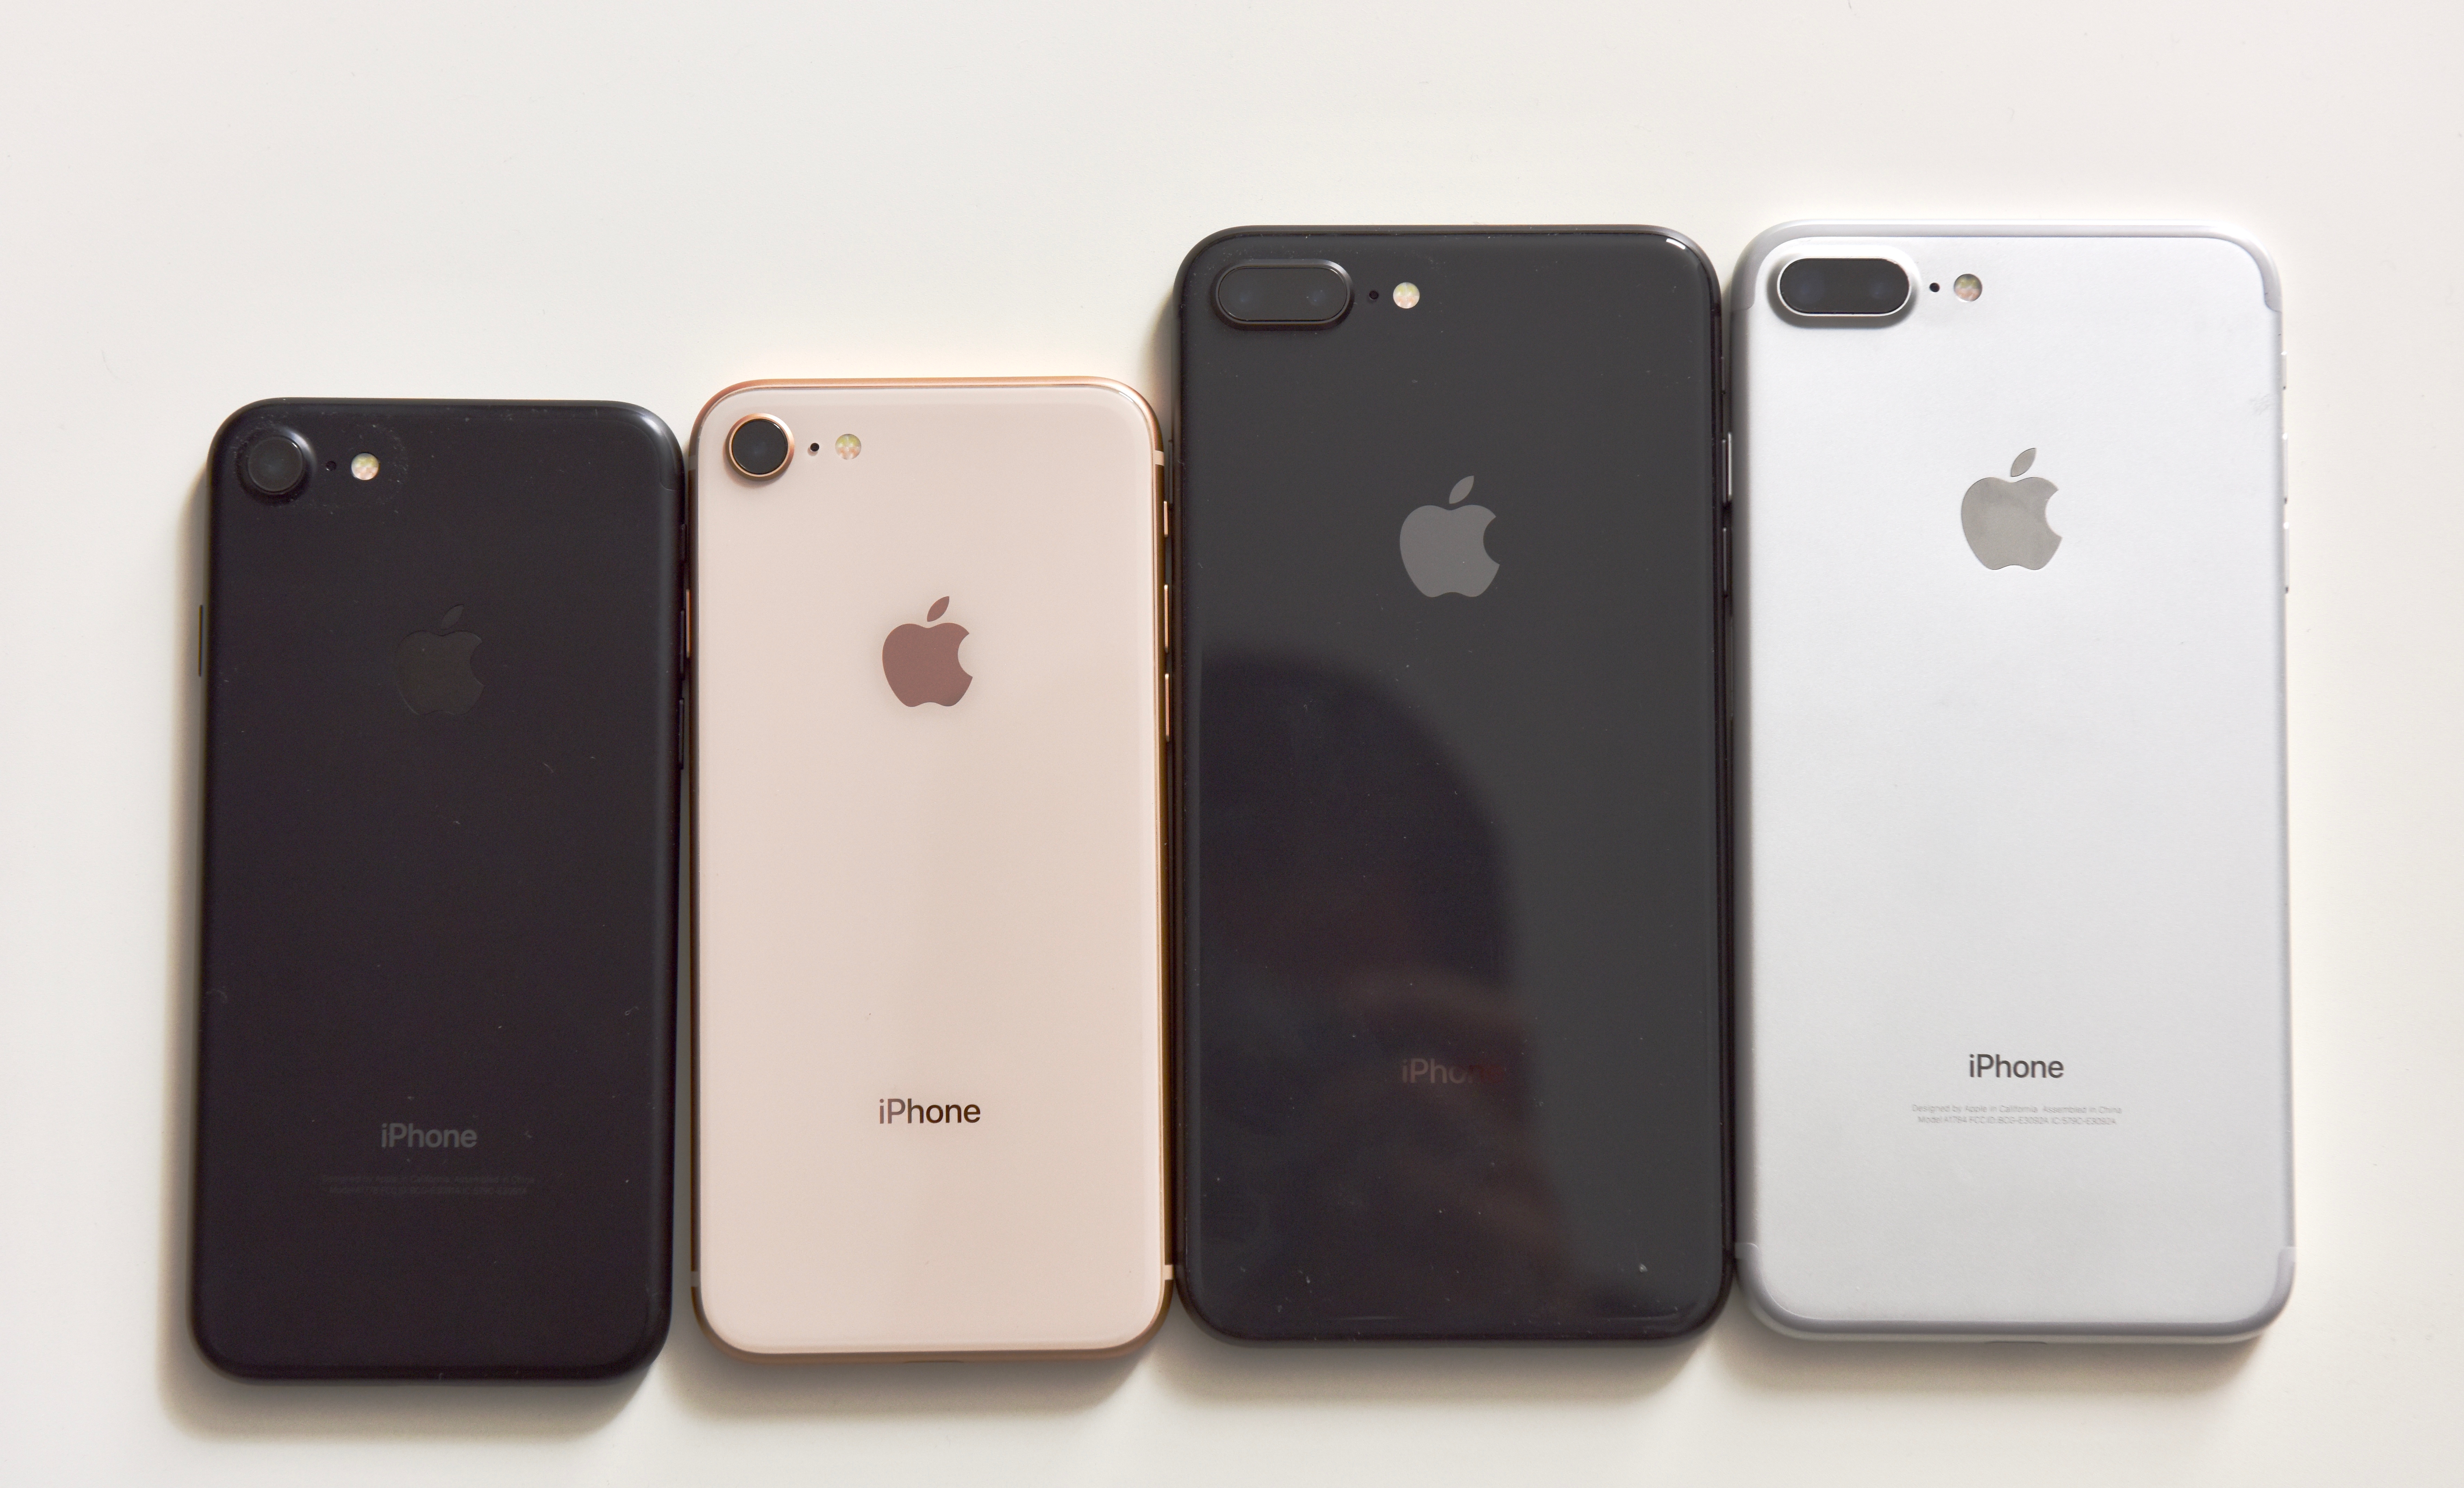 Best Iphone Trade In Deals To Save On The Iphone X